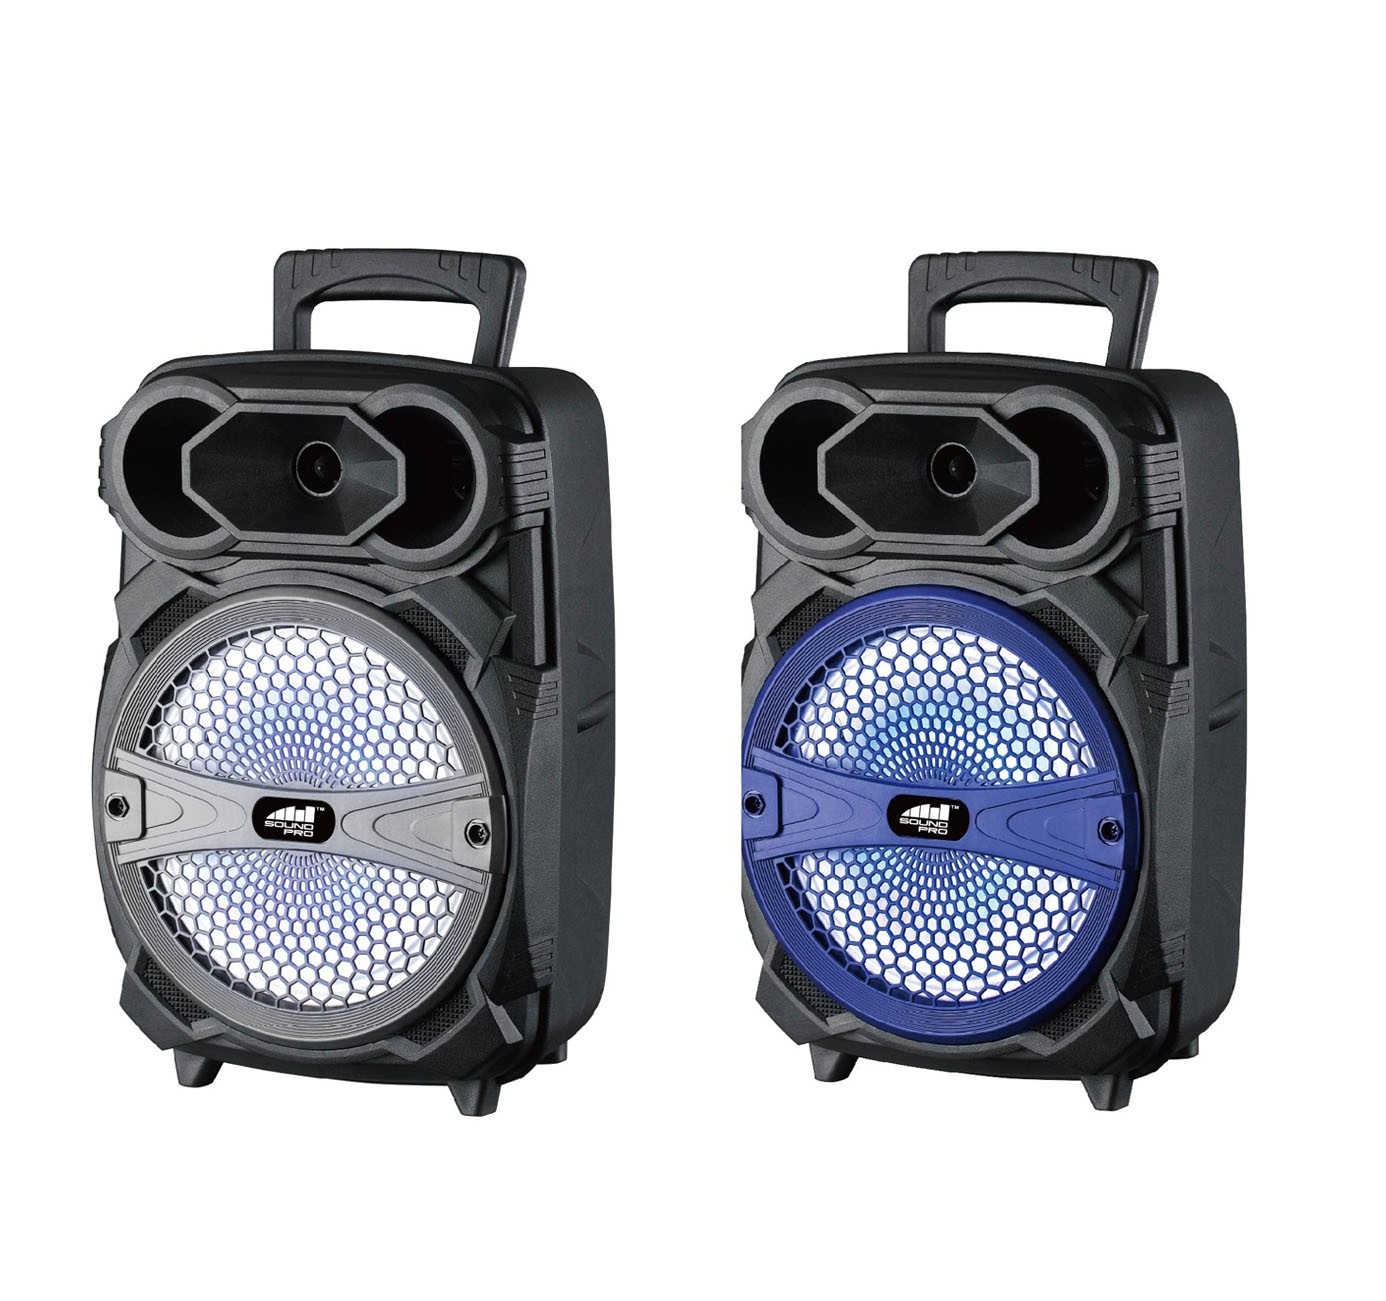 LED Speaker Effects Lighting Portable Electronics – with Party Naxa